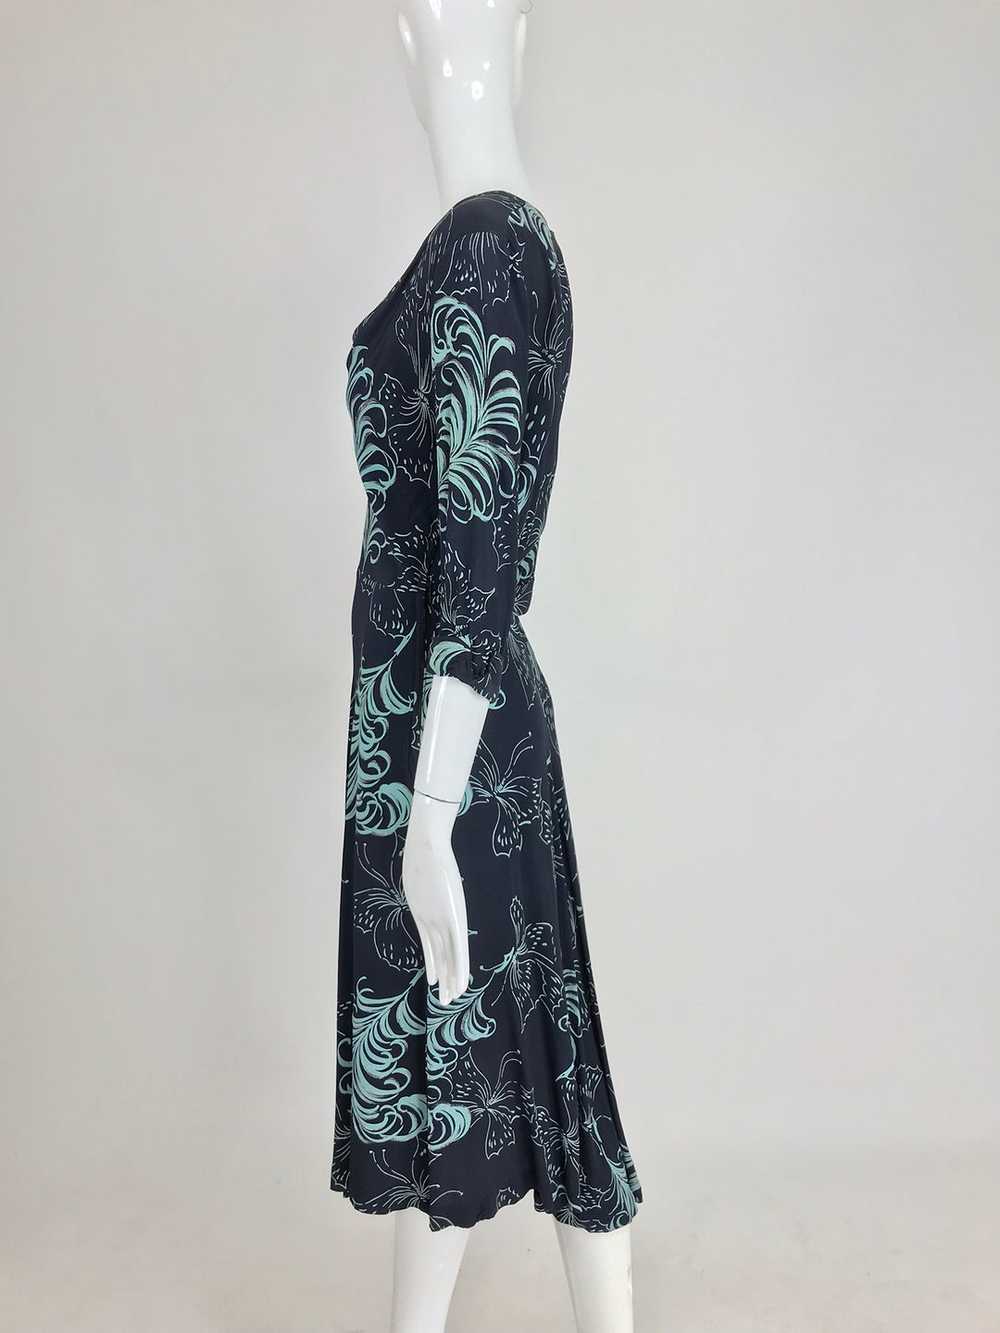 1940s Plume and Butterfly Rayon Print Day Dress - image 4